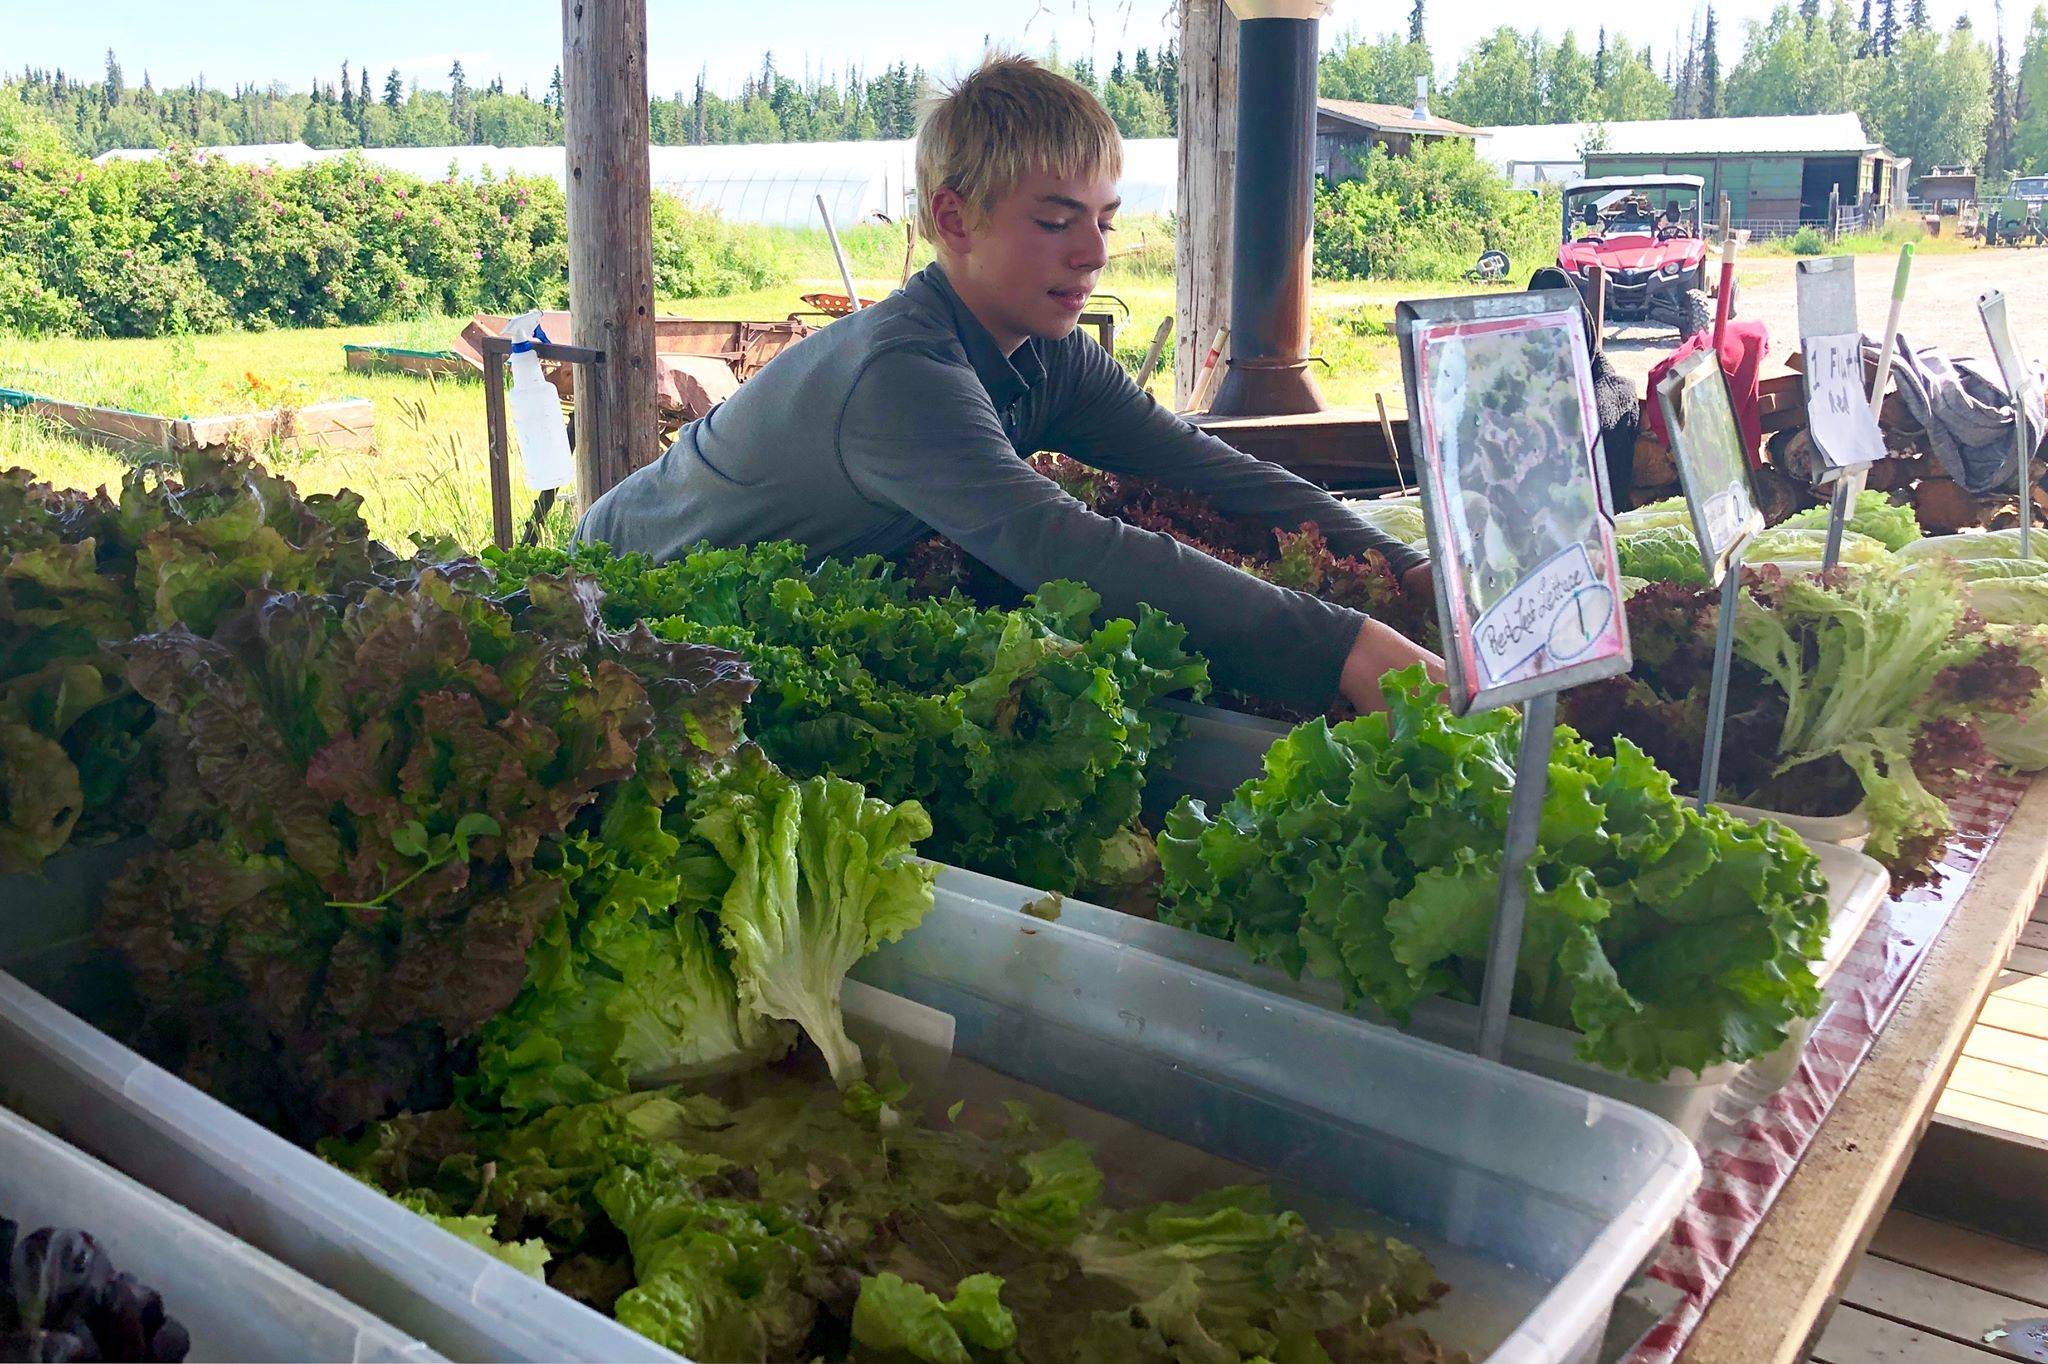 Kale Morse places produce at the pick up center for Ridgeway Farm’s community supported agriculture programs, which helps distribute locally grown produce to local residents, Wednesday, July 17, 2019, near Soldotna, Alaska. (Photo by Victoria Petersen/Peninsula Clarion)